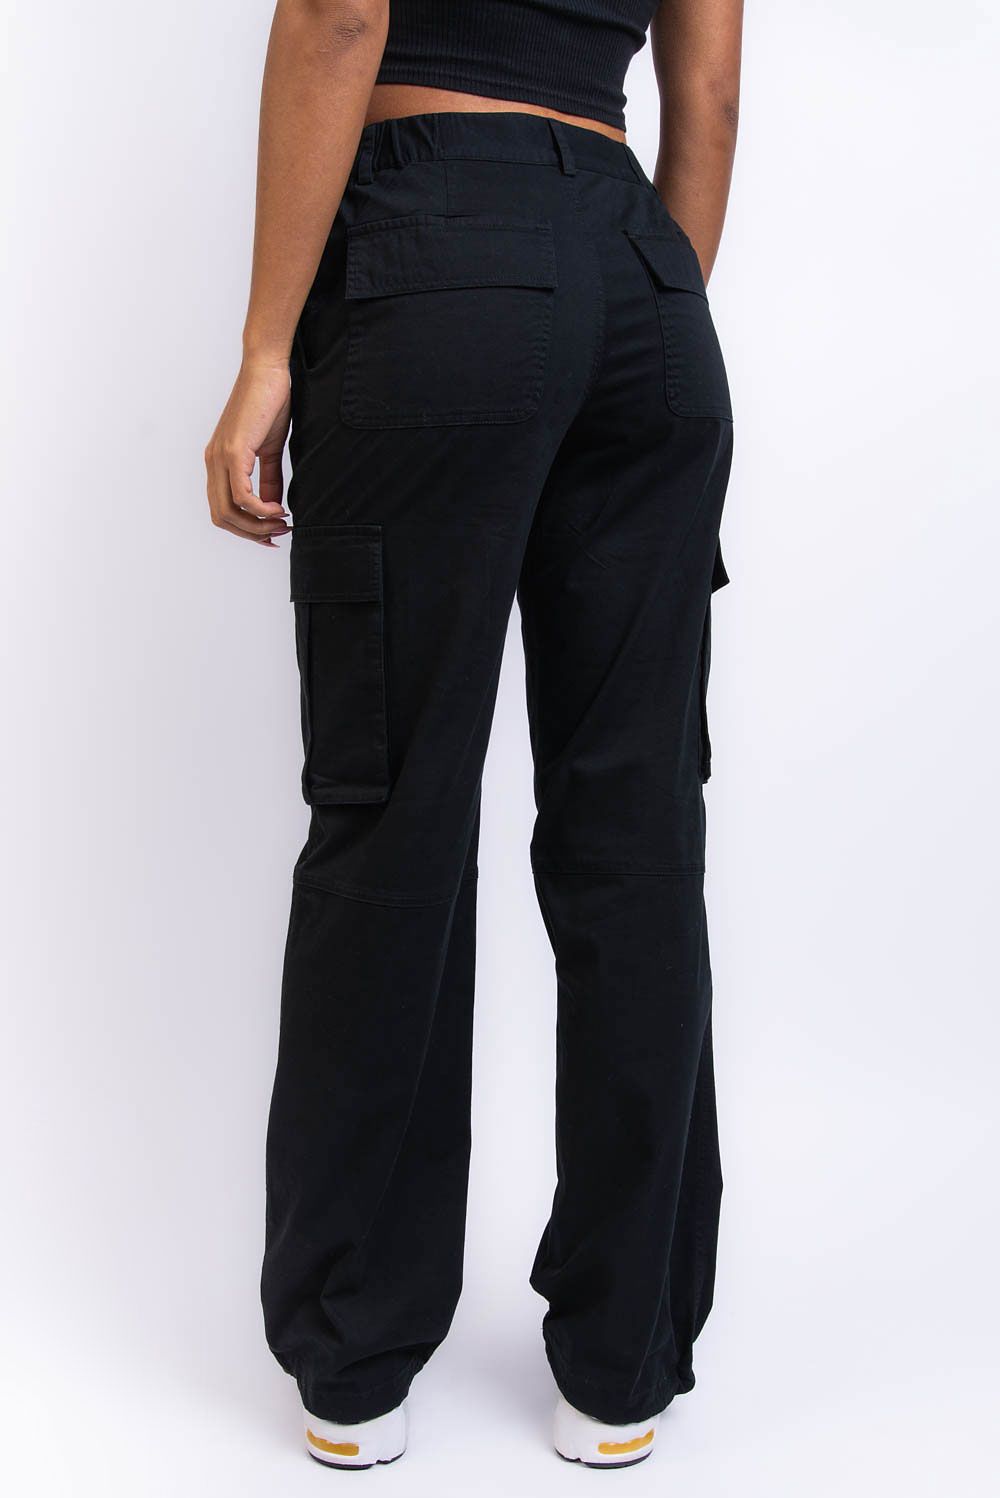 Low Waist Bootcut Jeans - Claire MADLADY